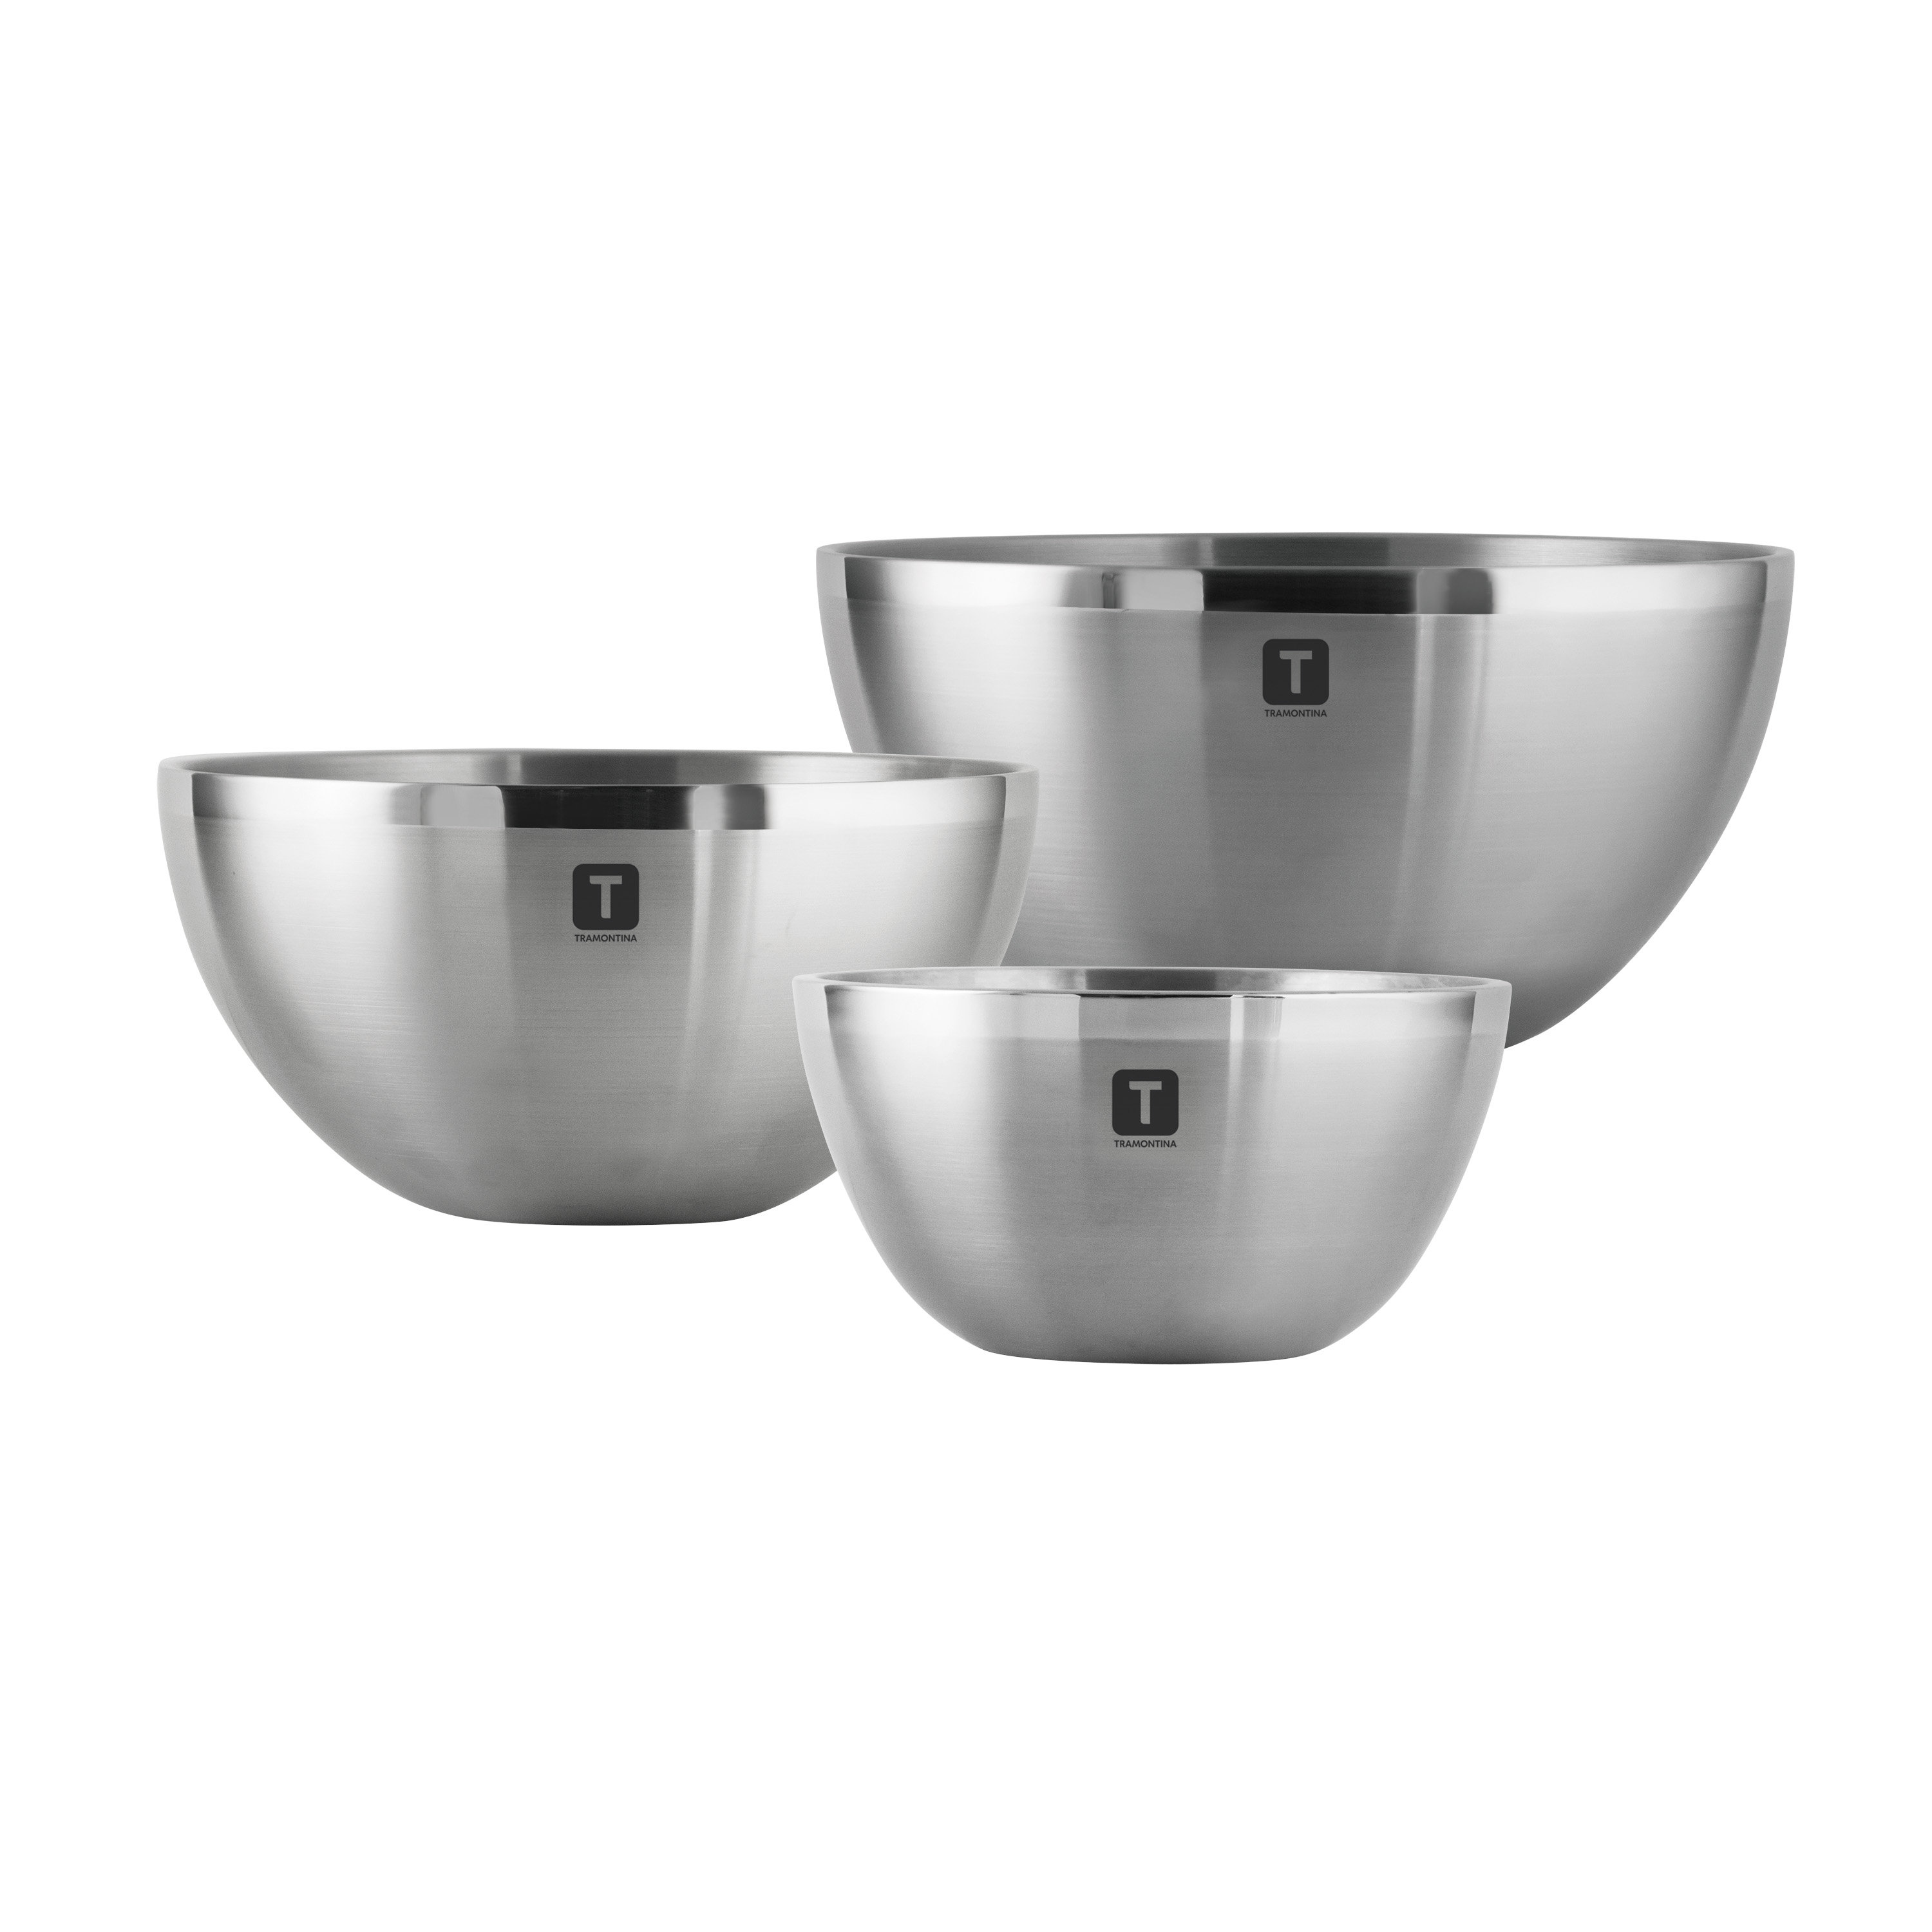 Tramontina Gourmet 5 qt. Stainless Steel Mixing Bowl